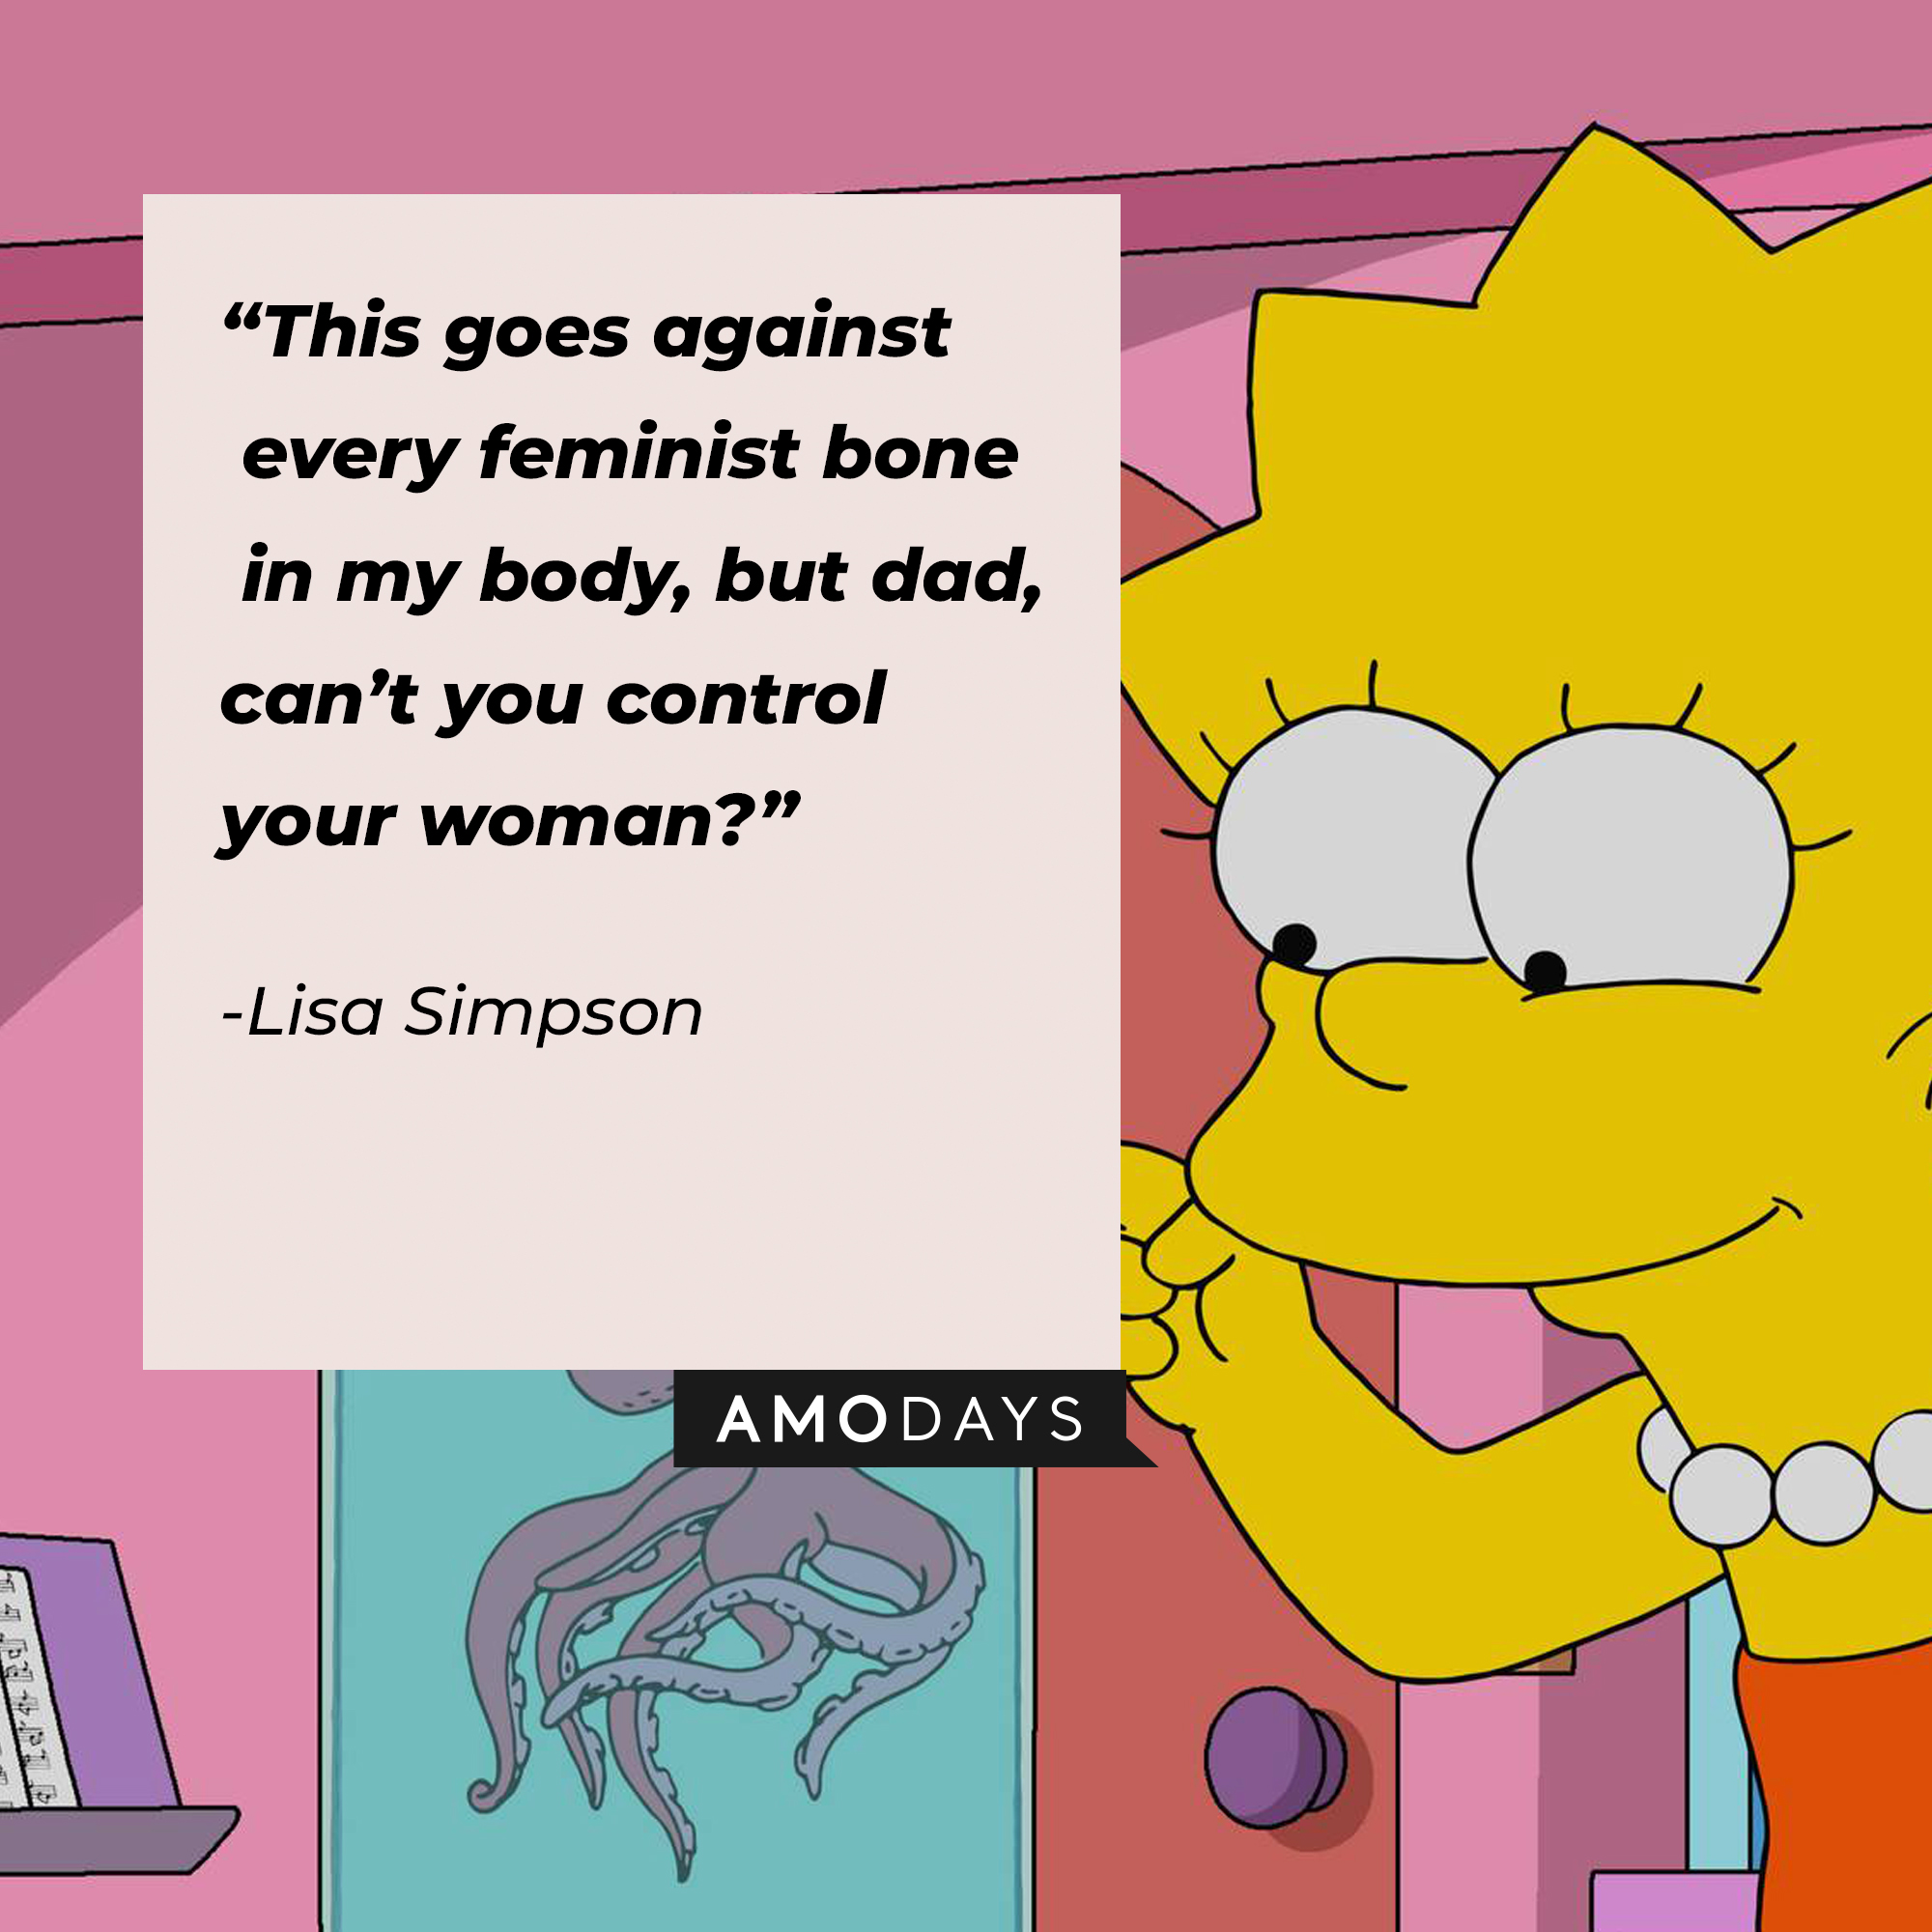 Lisa Simpson, with her quote: “This goes against every feminist bone in my body, but dad, can’t you control your woman?” | Source: facebook.com/TheSimpsons